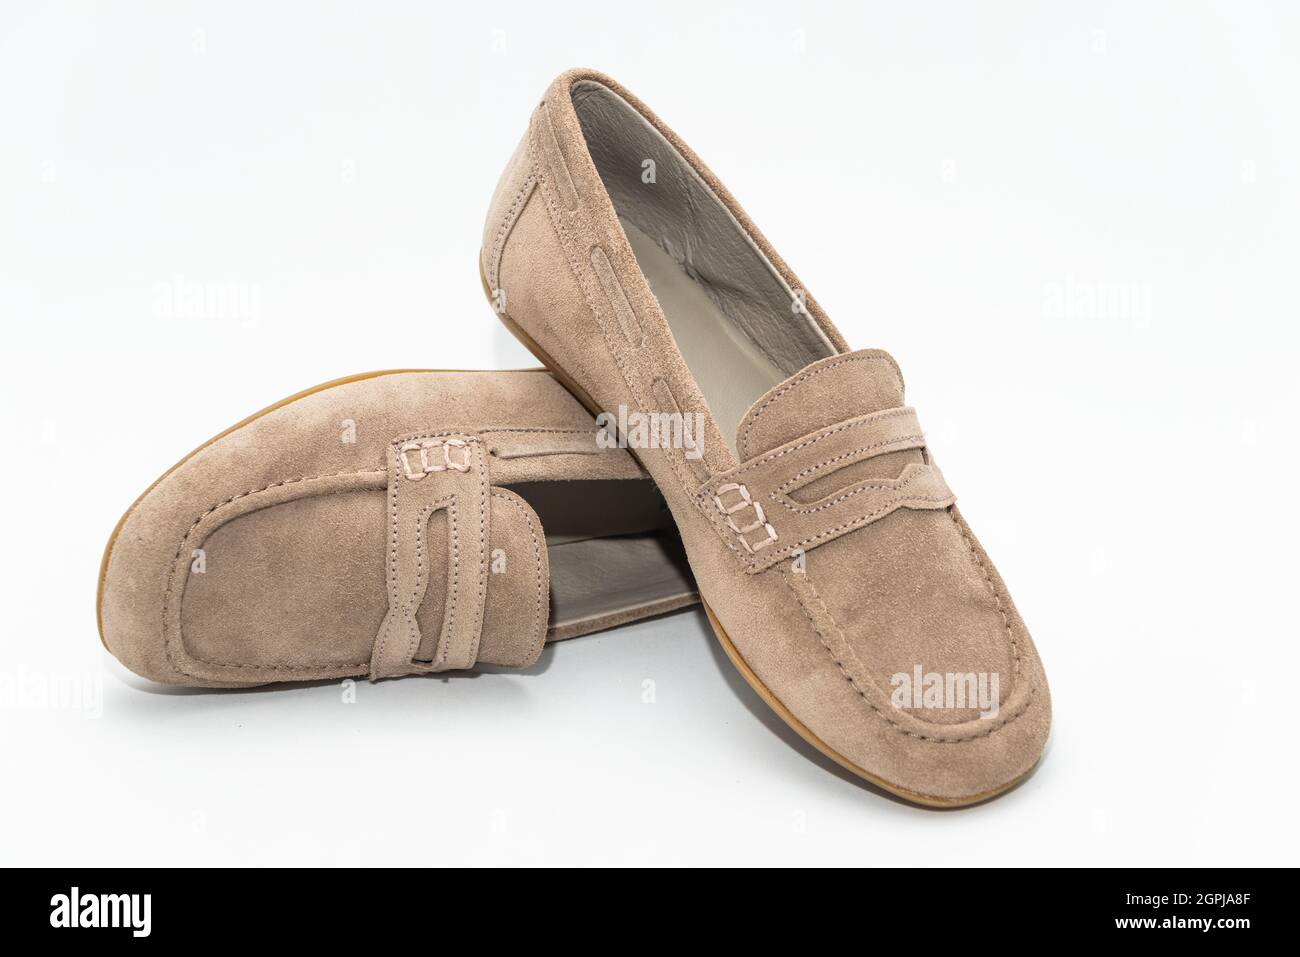 children's classic blue leather shoes. white background online product Stock Photo